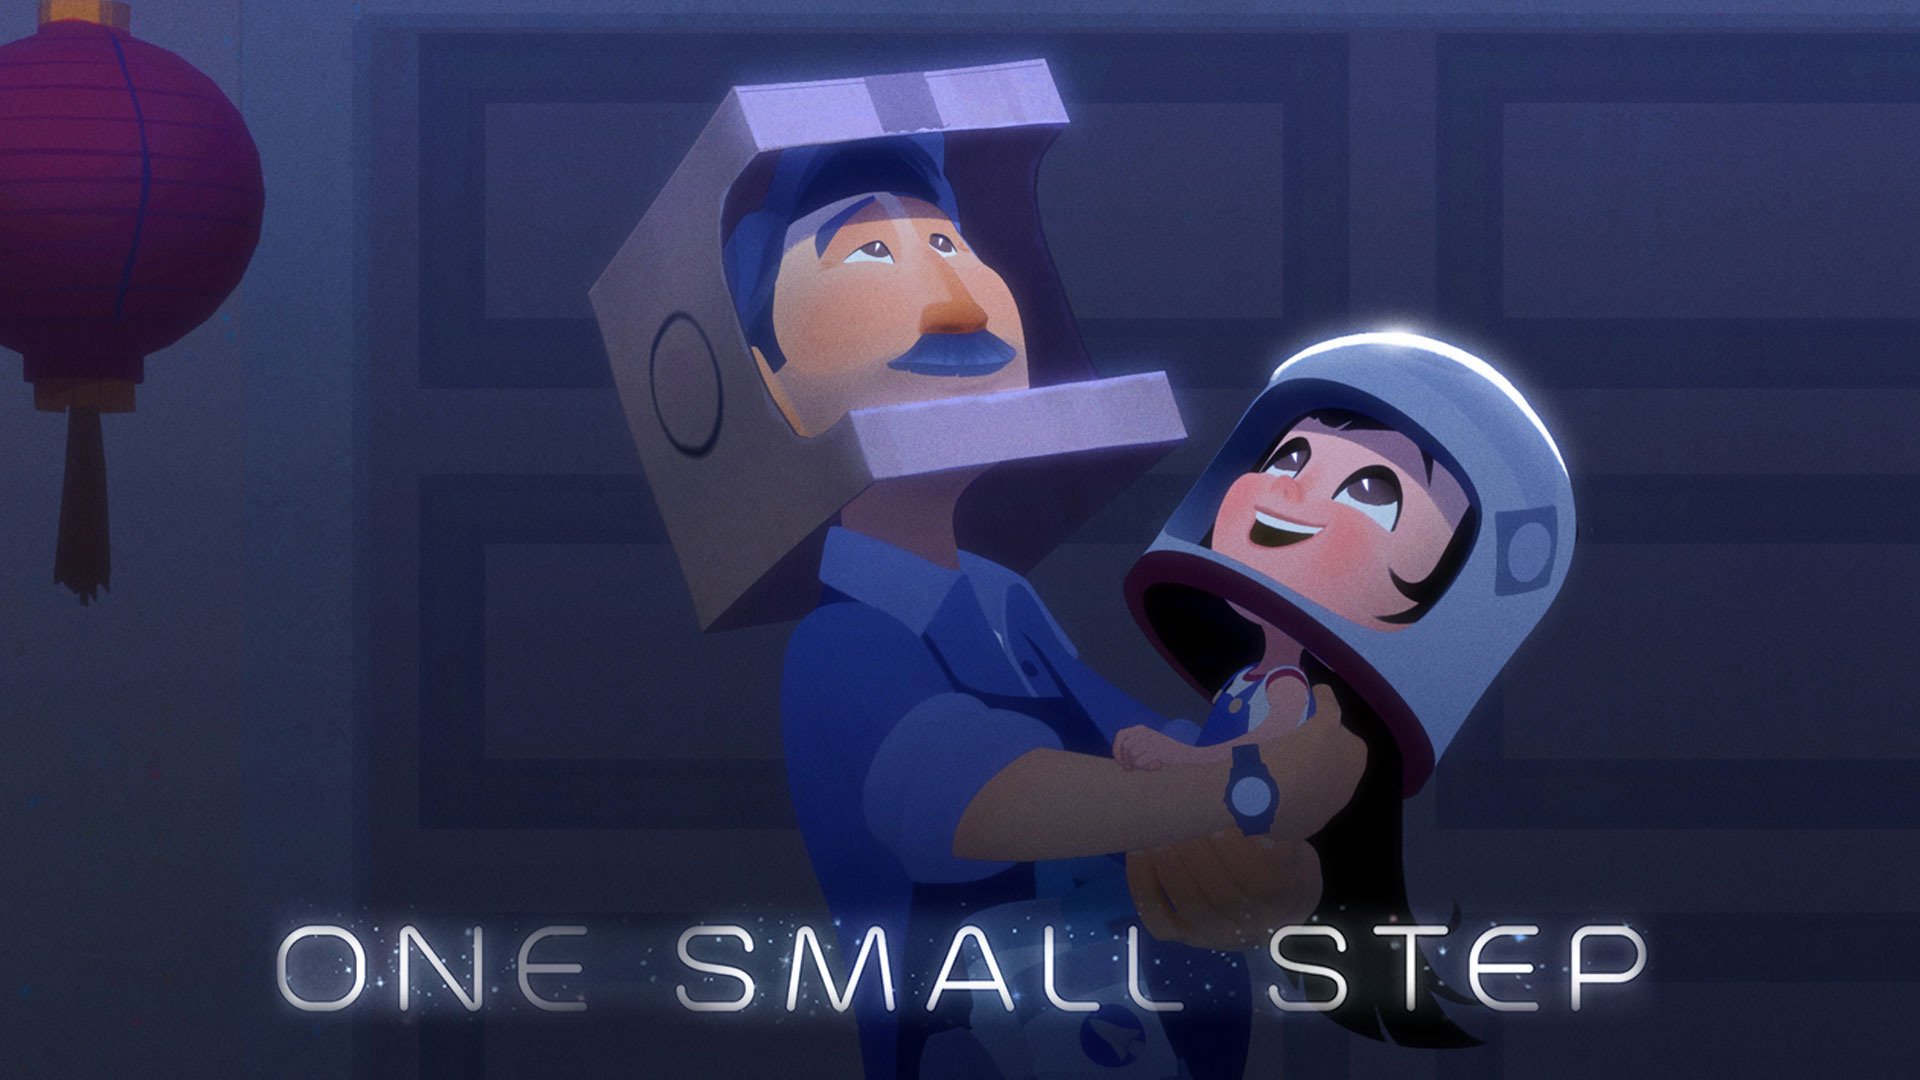 ONE SMALL STEP